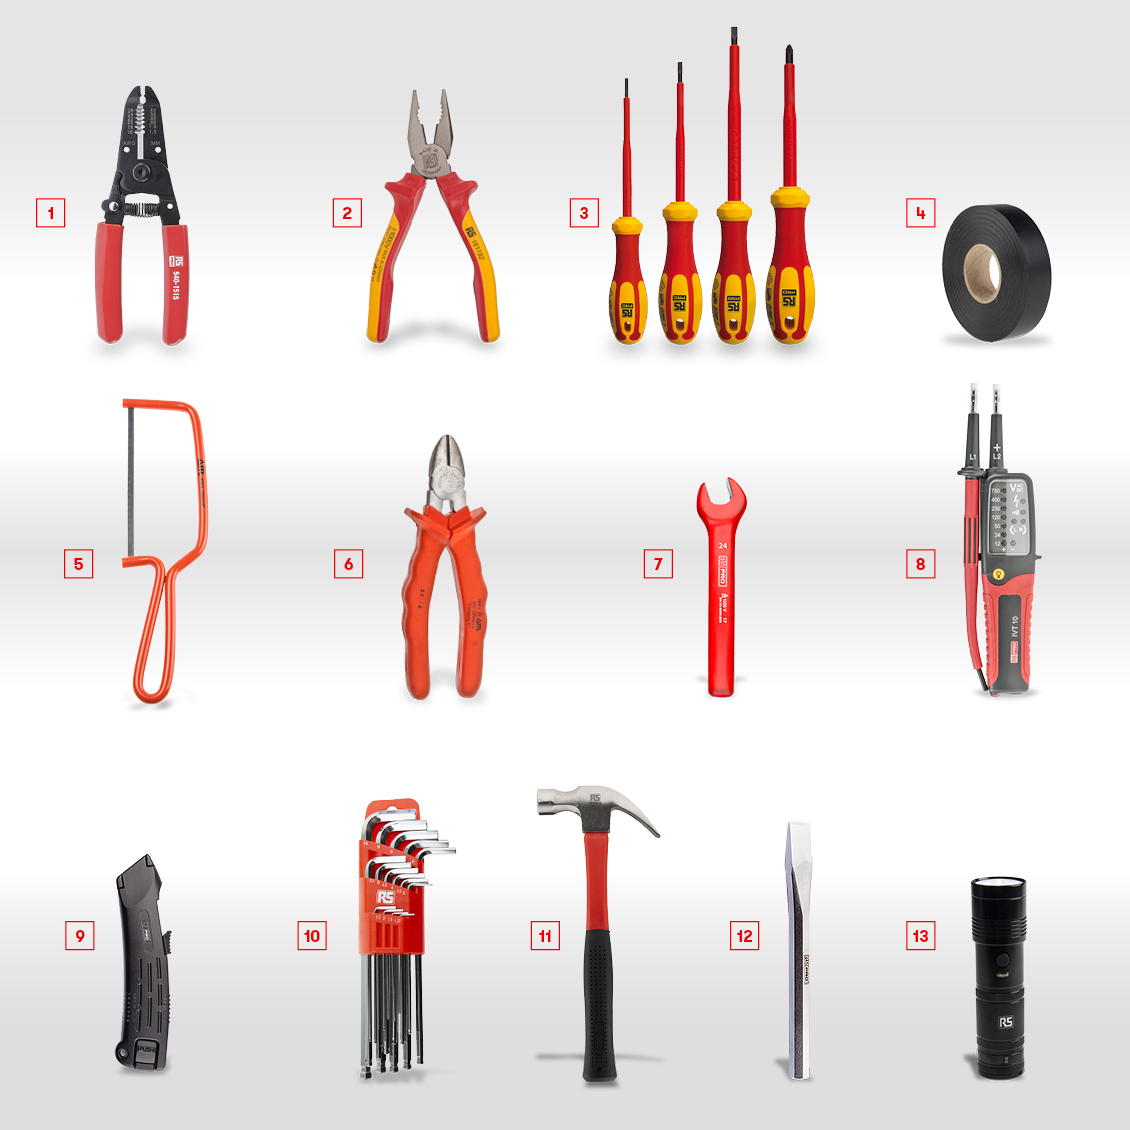 Top 13 Tools For The Best Electricians Tool Kit 2019 Rs Components Rs Australia